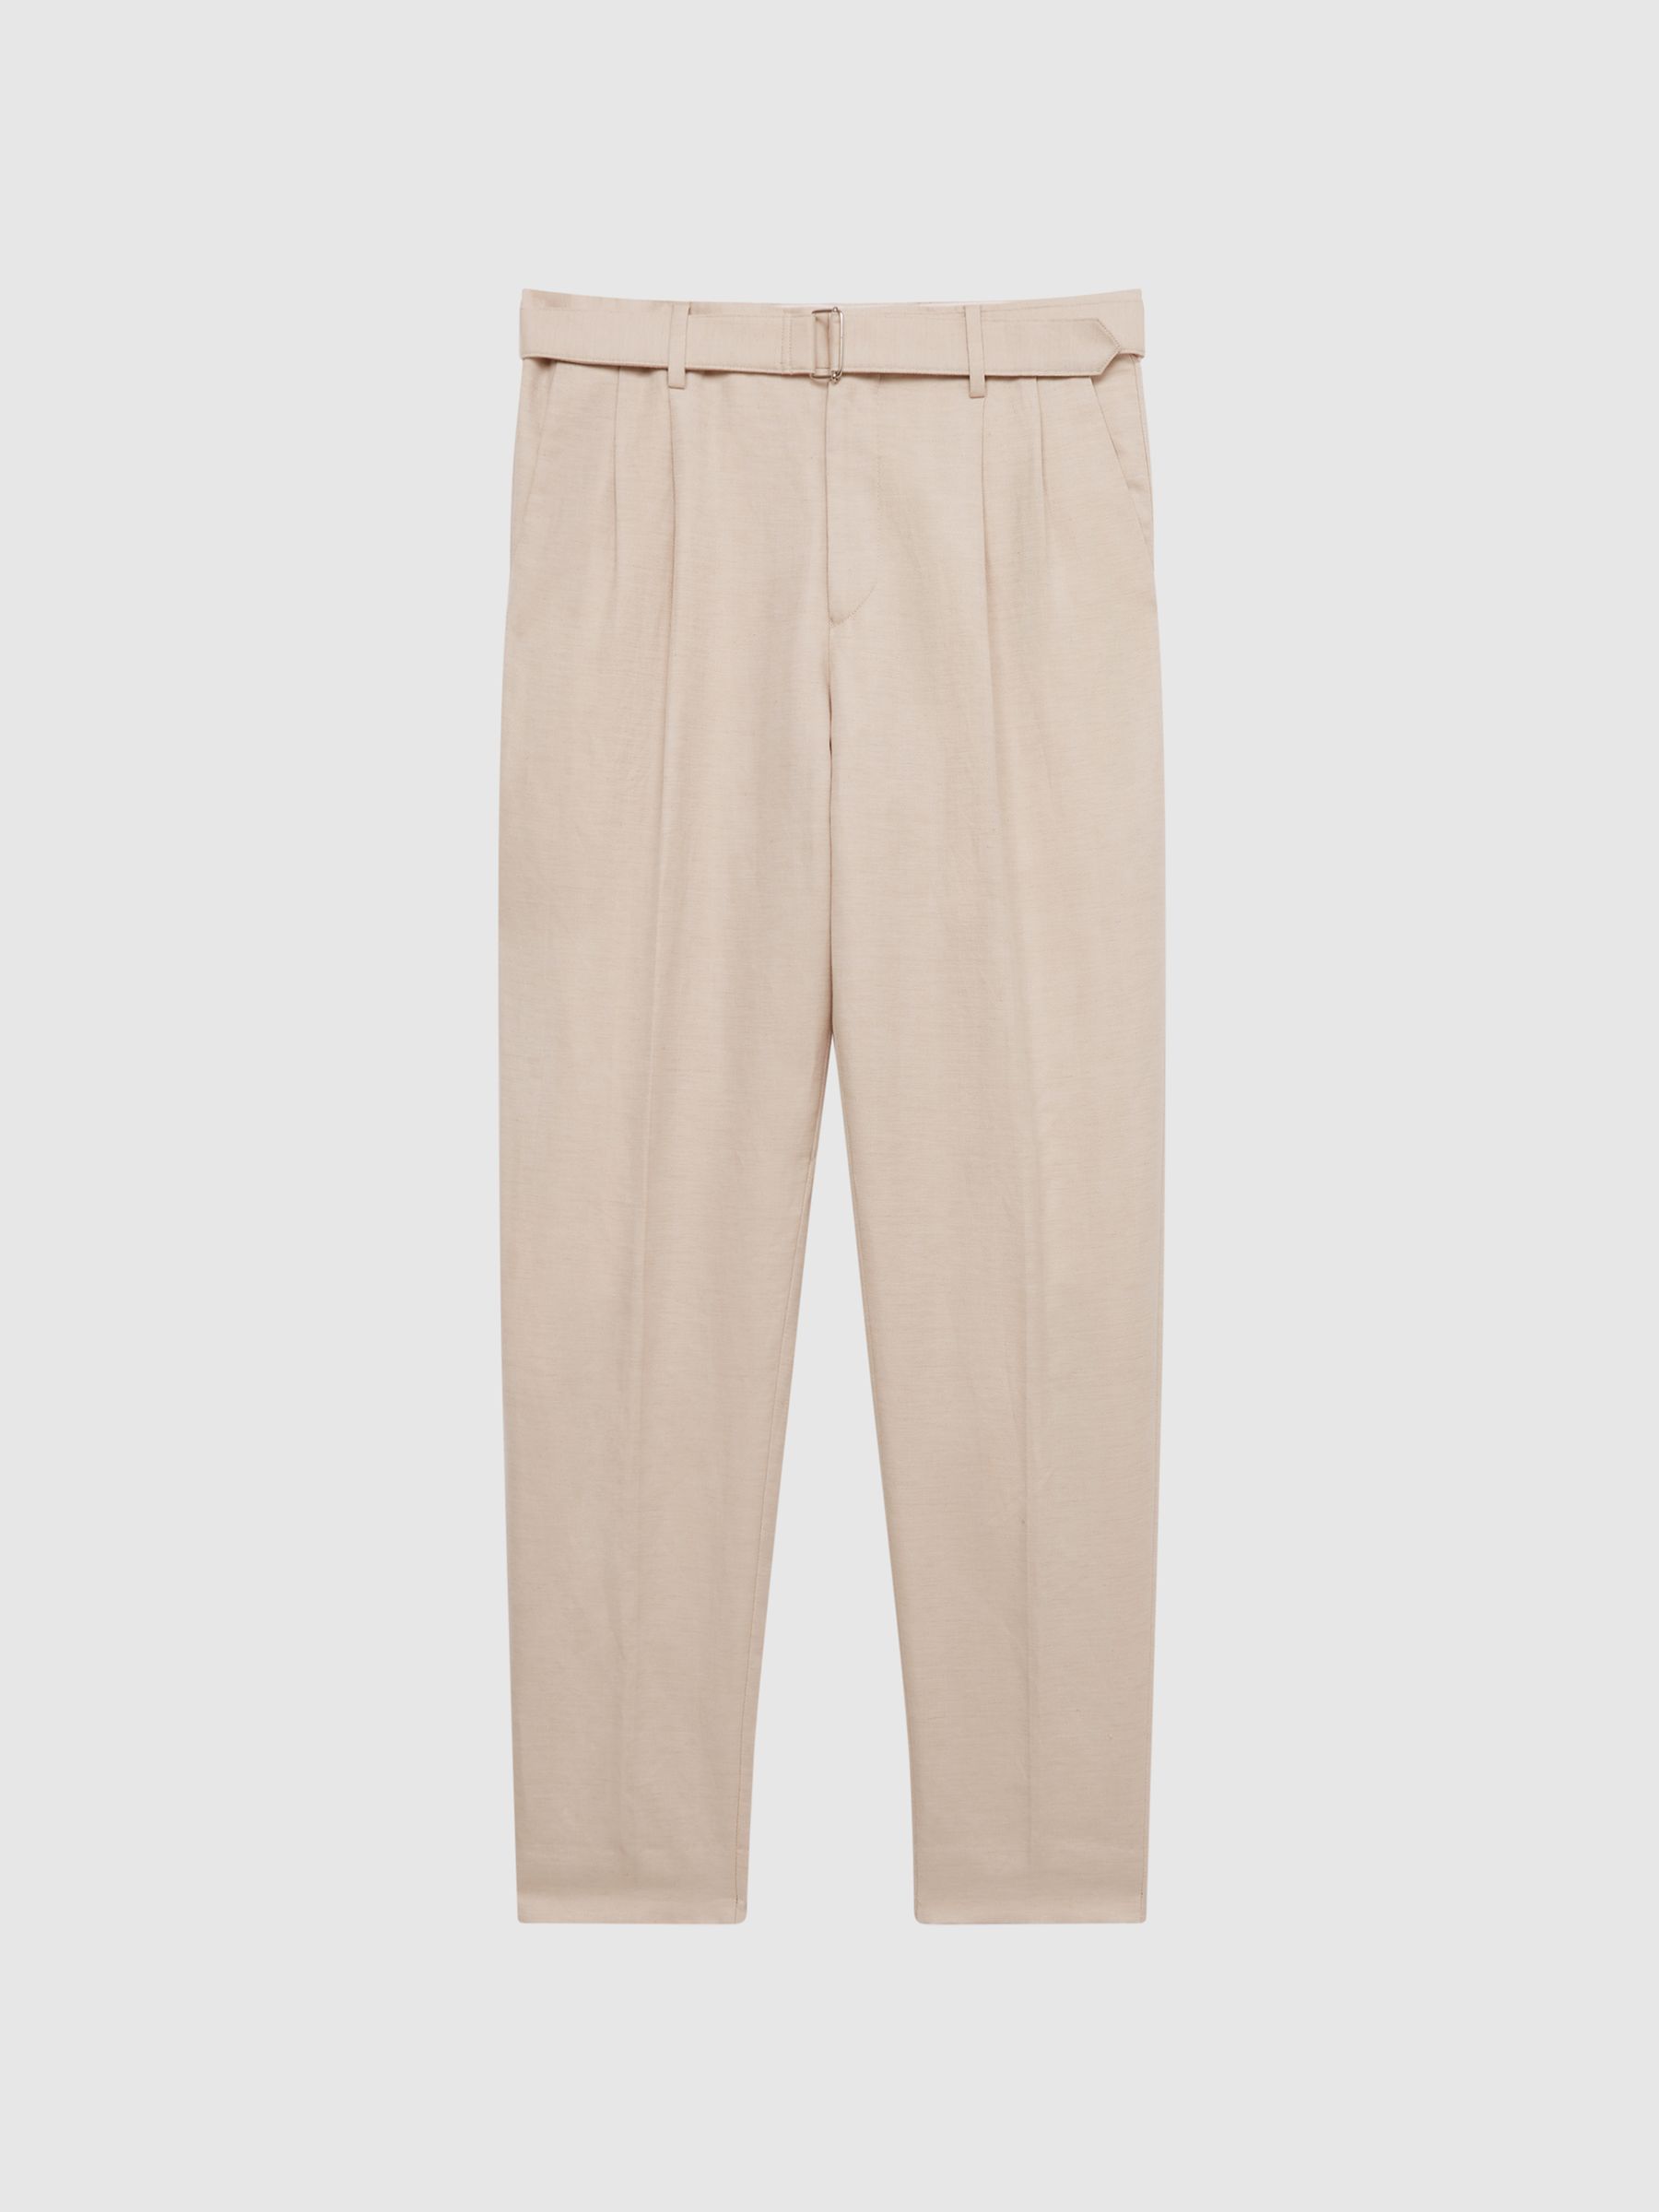 Reiss Trail Cotton-Linen Buckled Trousers - REISS